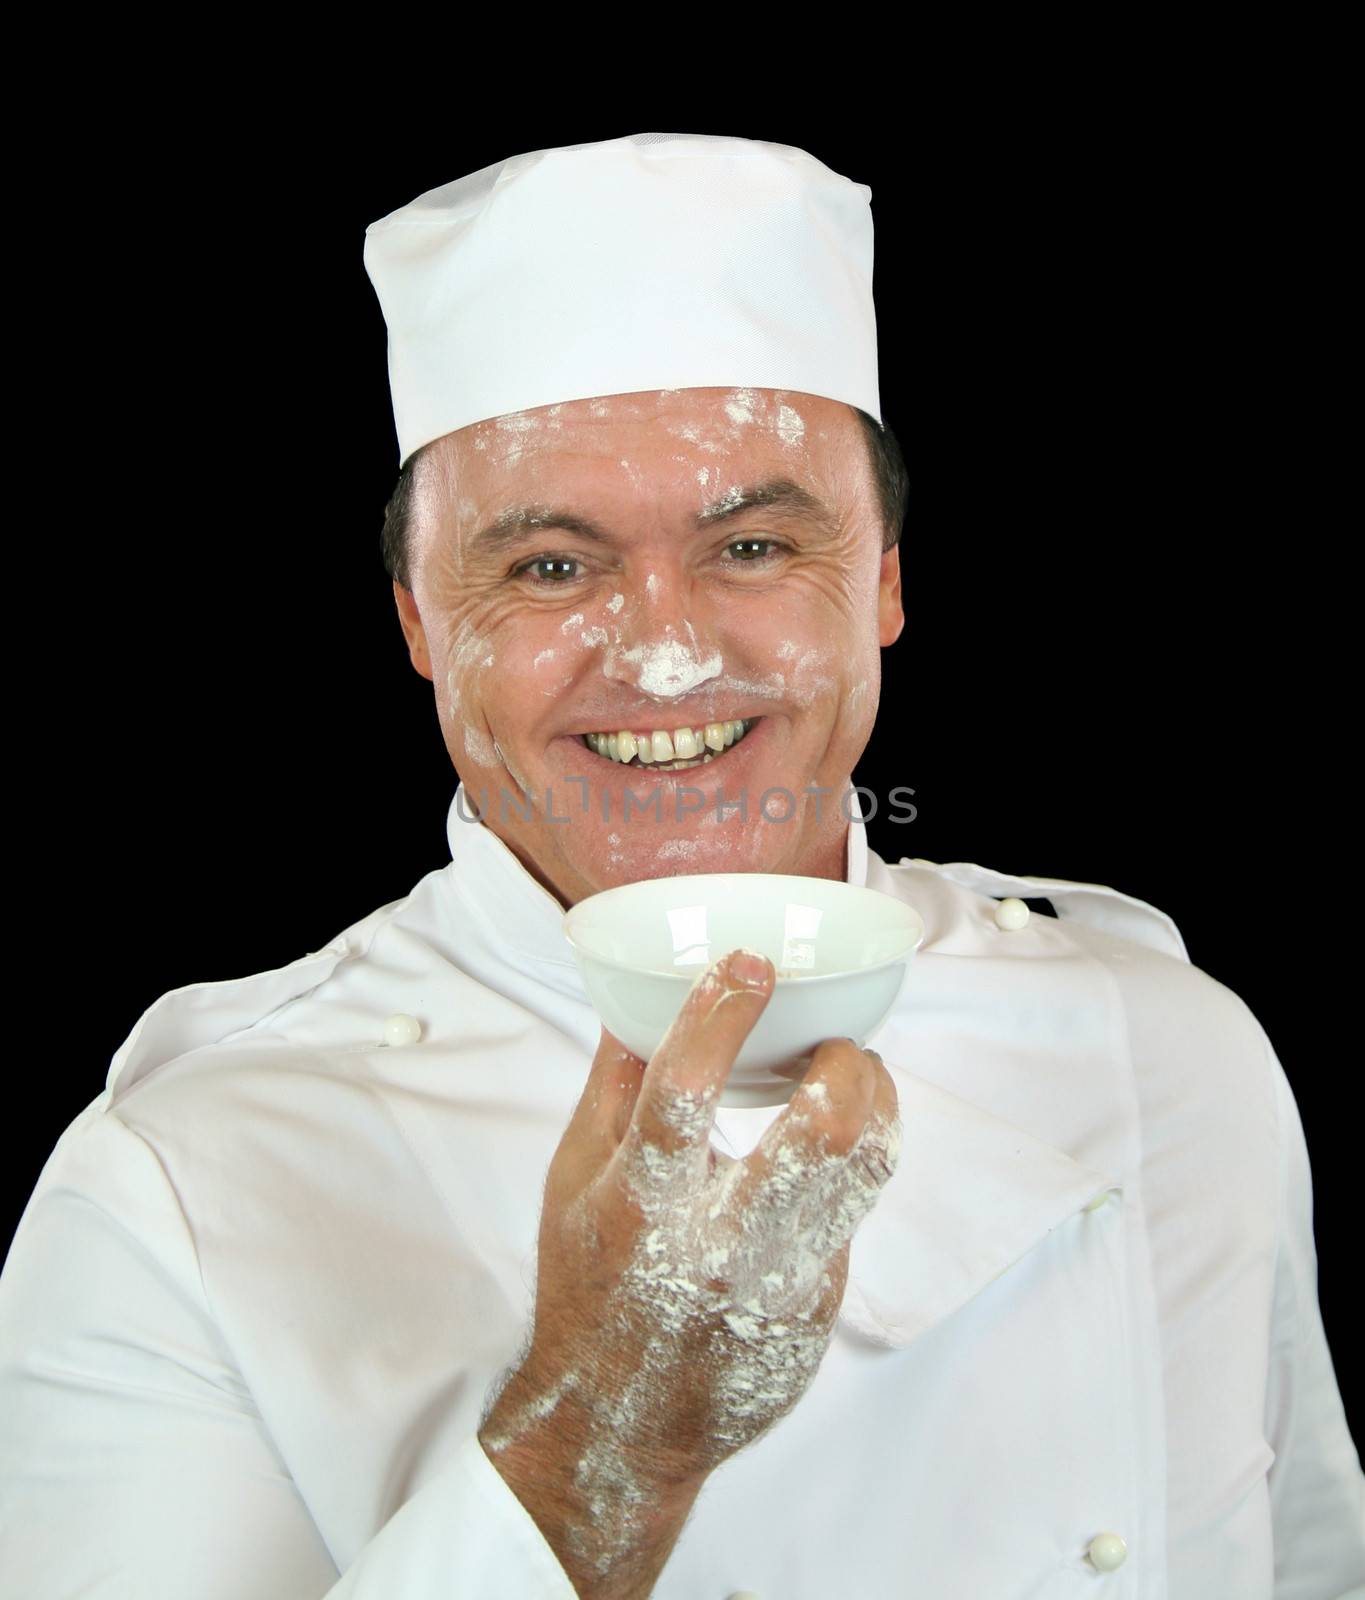 Smiling chef has had a nasty accident with the flour.